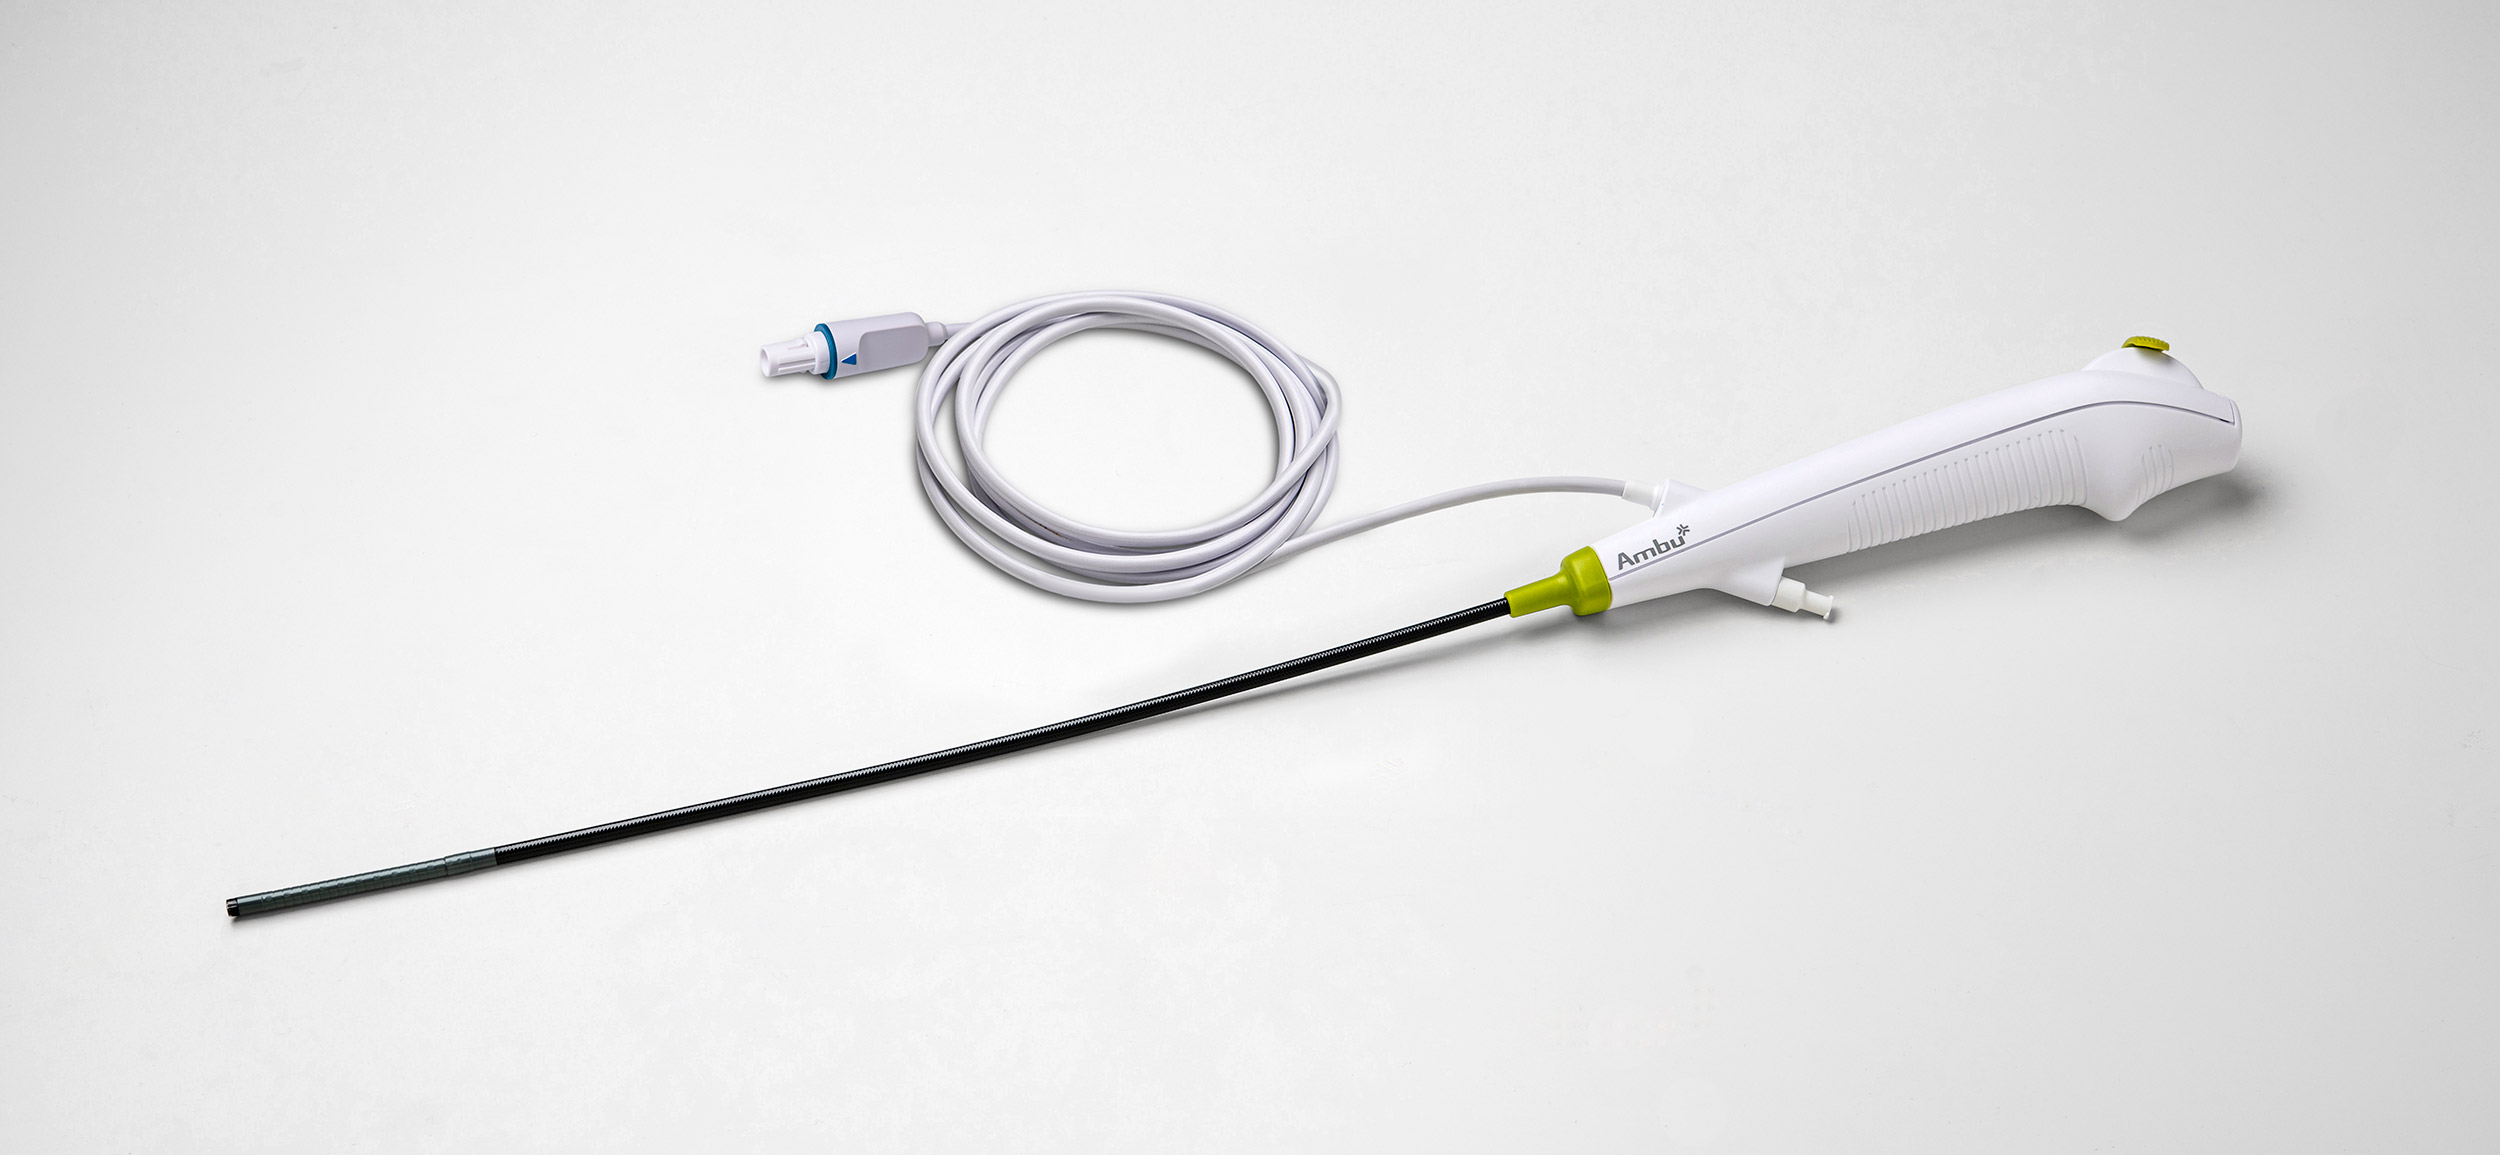 Study: Patients Prefer Option of Selecting Endoscopes